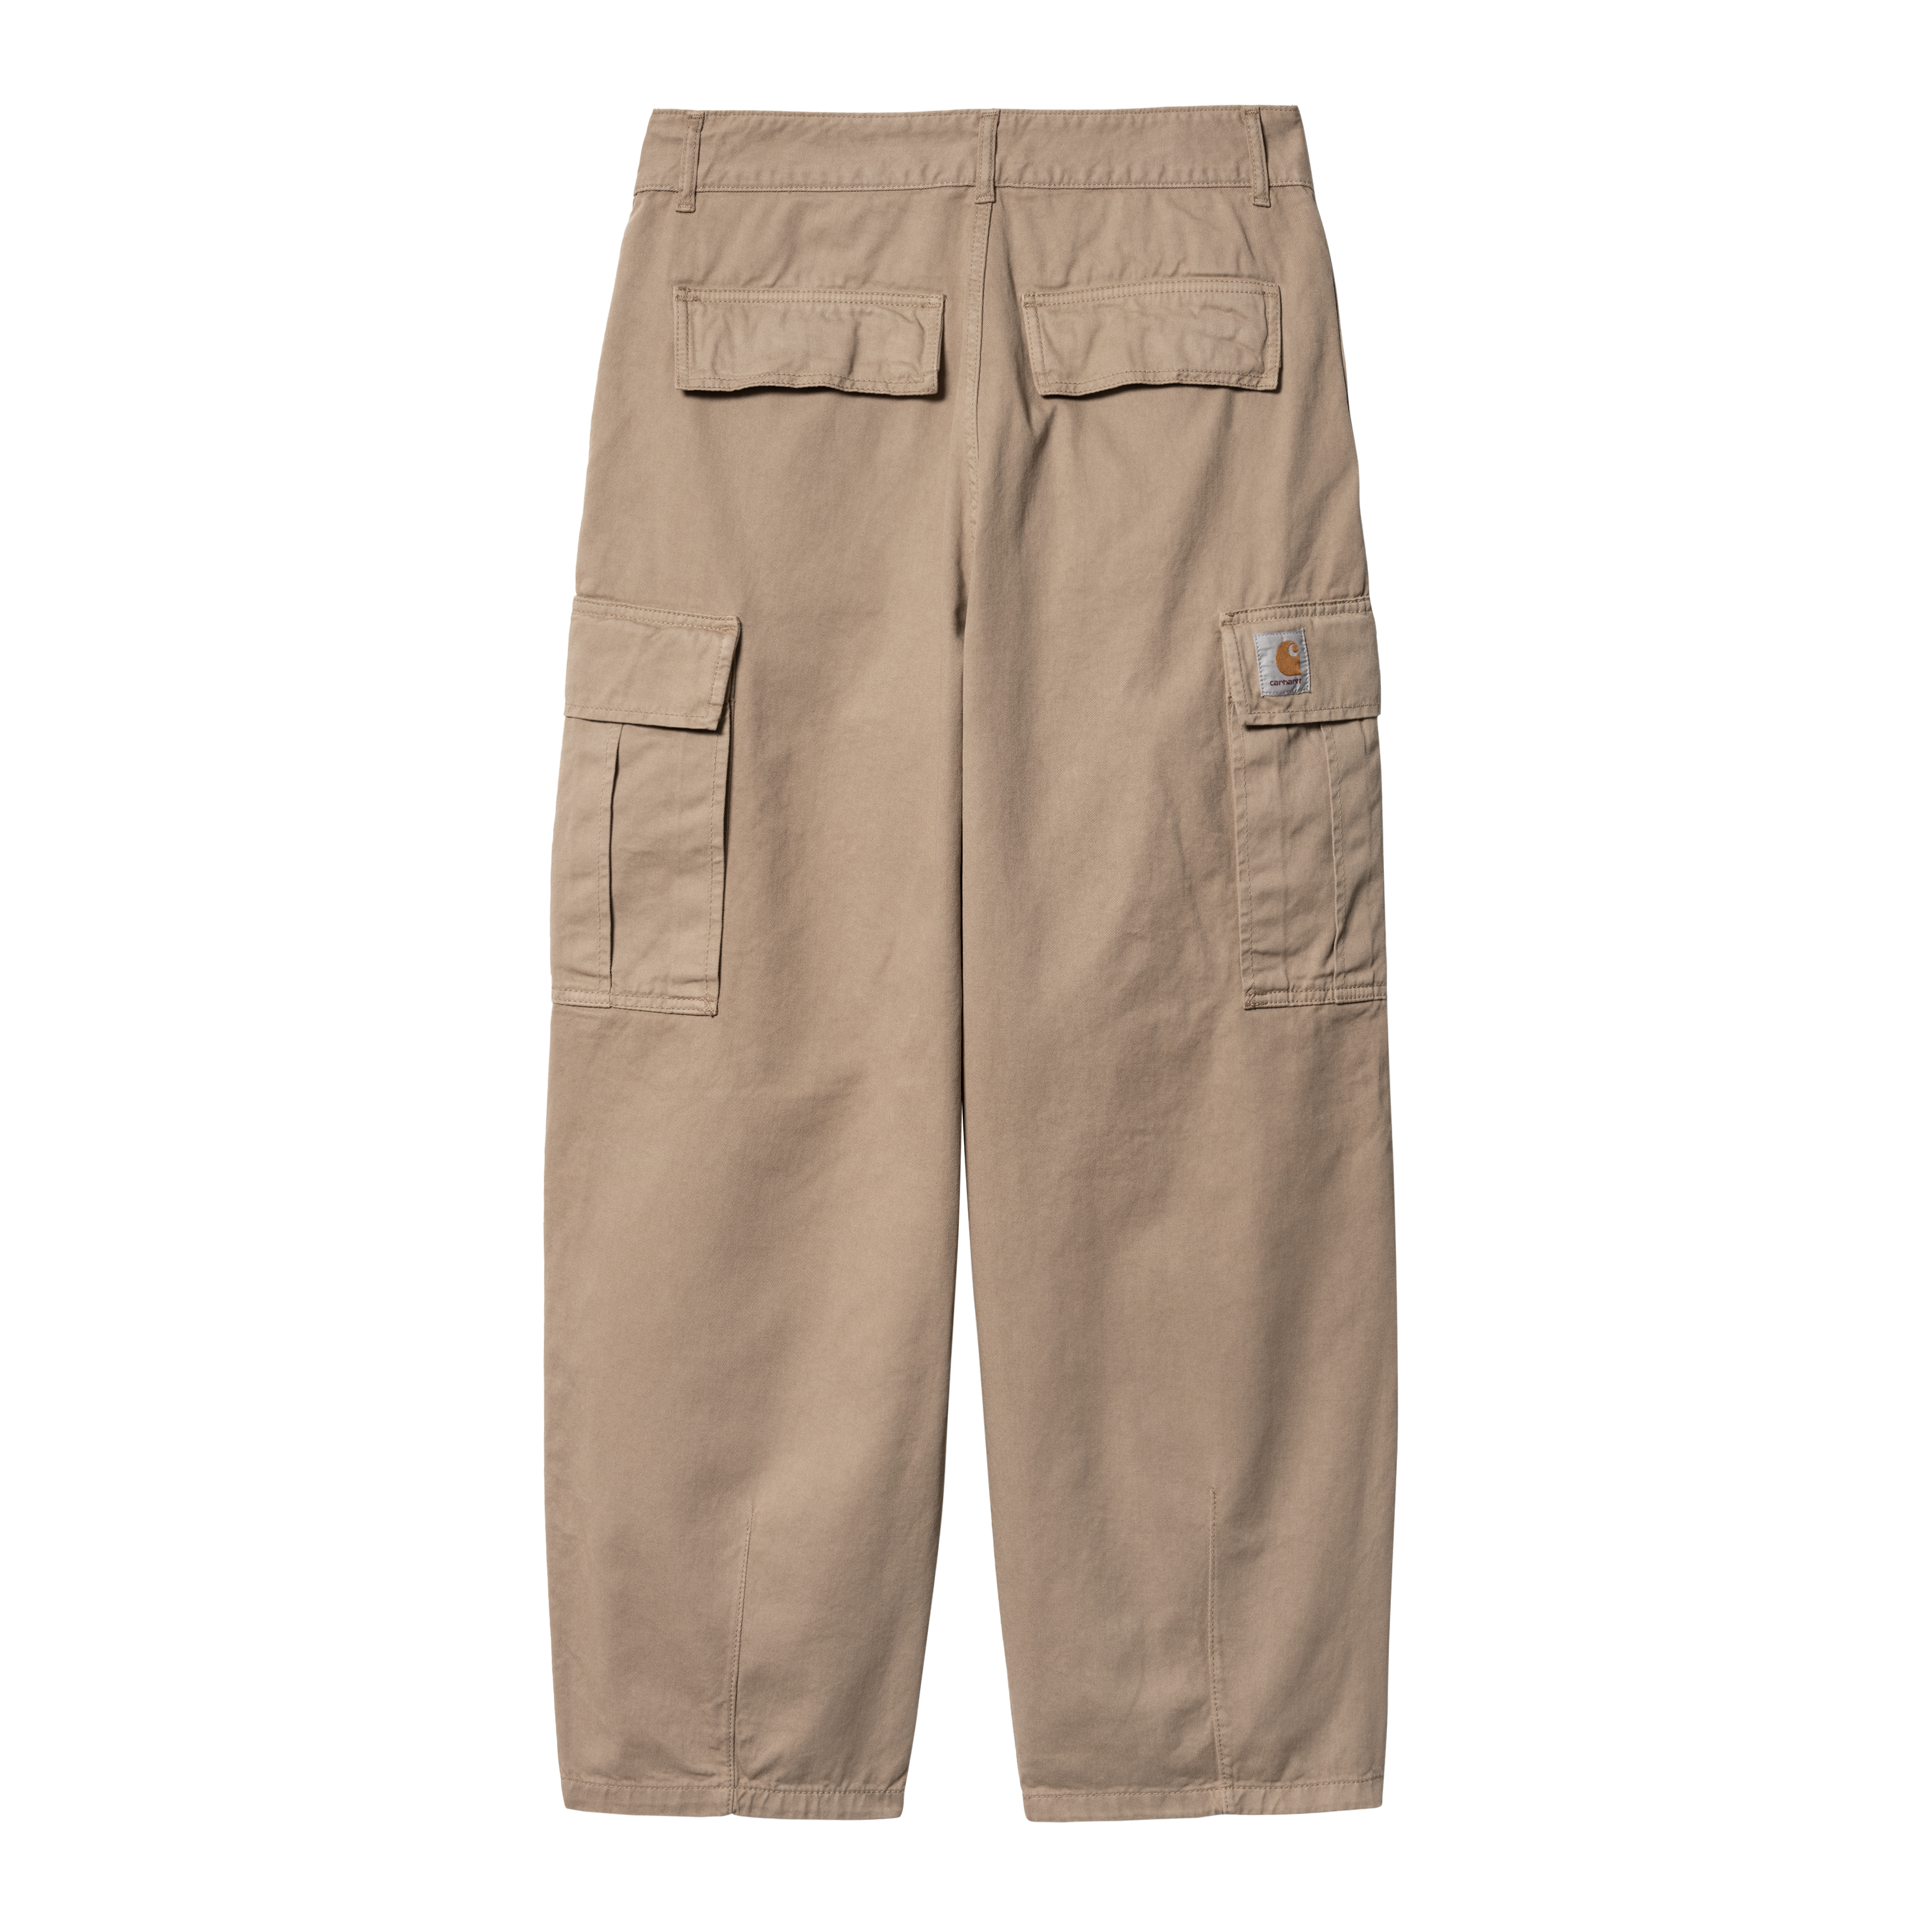 Carhartt Cargo Pants Review How Tough Are They  Tested by Bob Vila